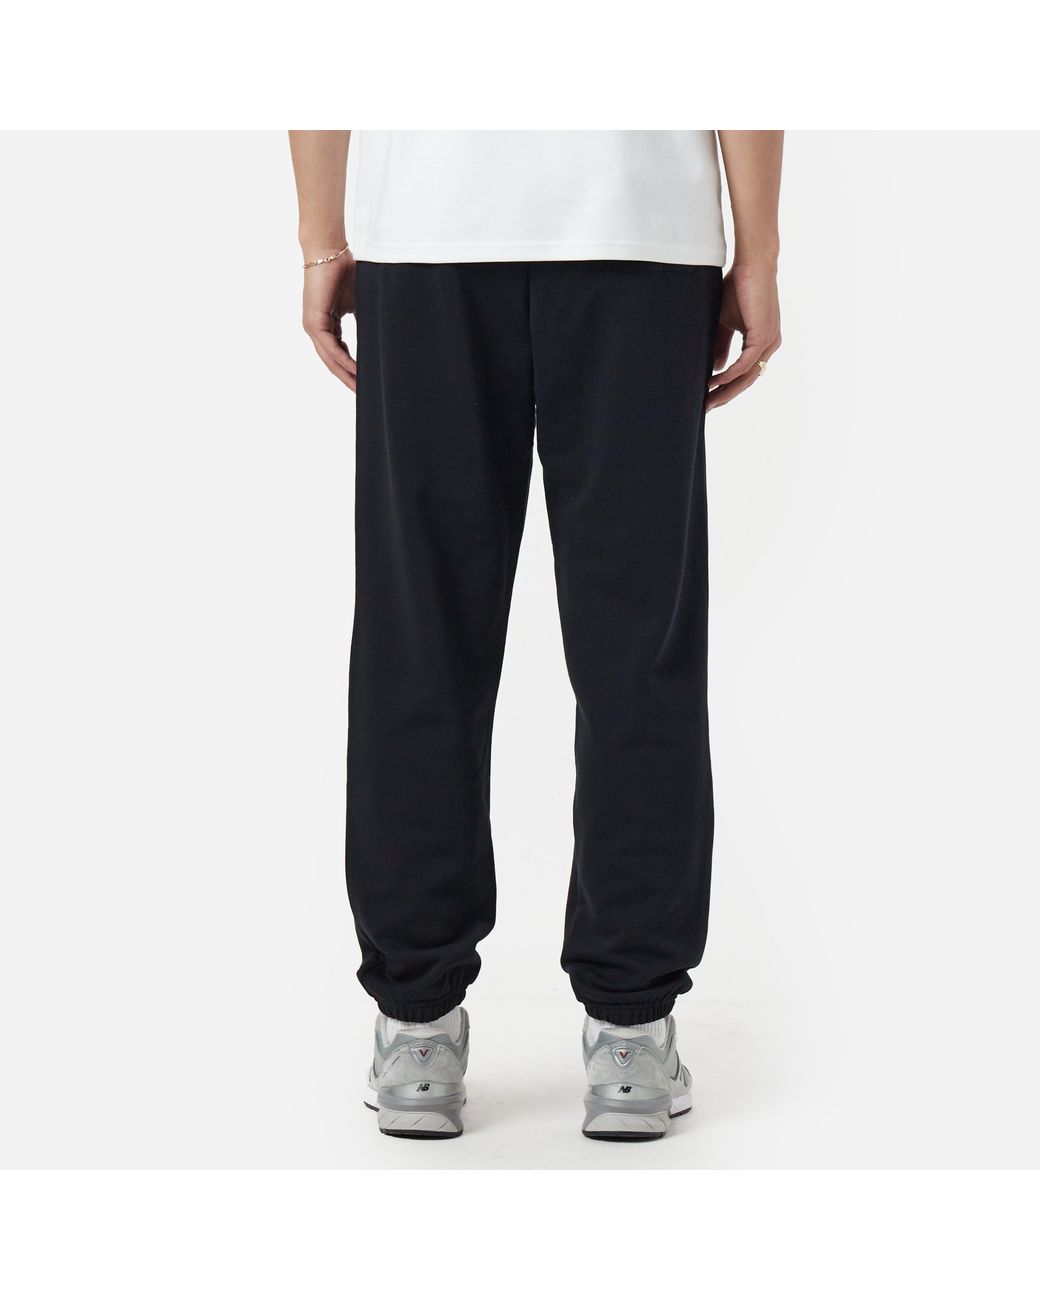 Fred Perry Fleece Track Pants in Black/Black (Black) for Men | Lyst Canada